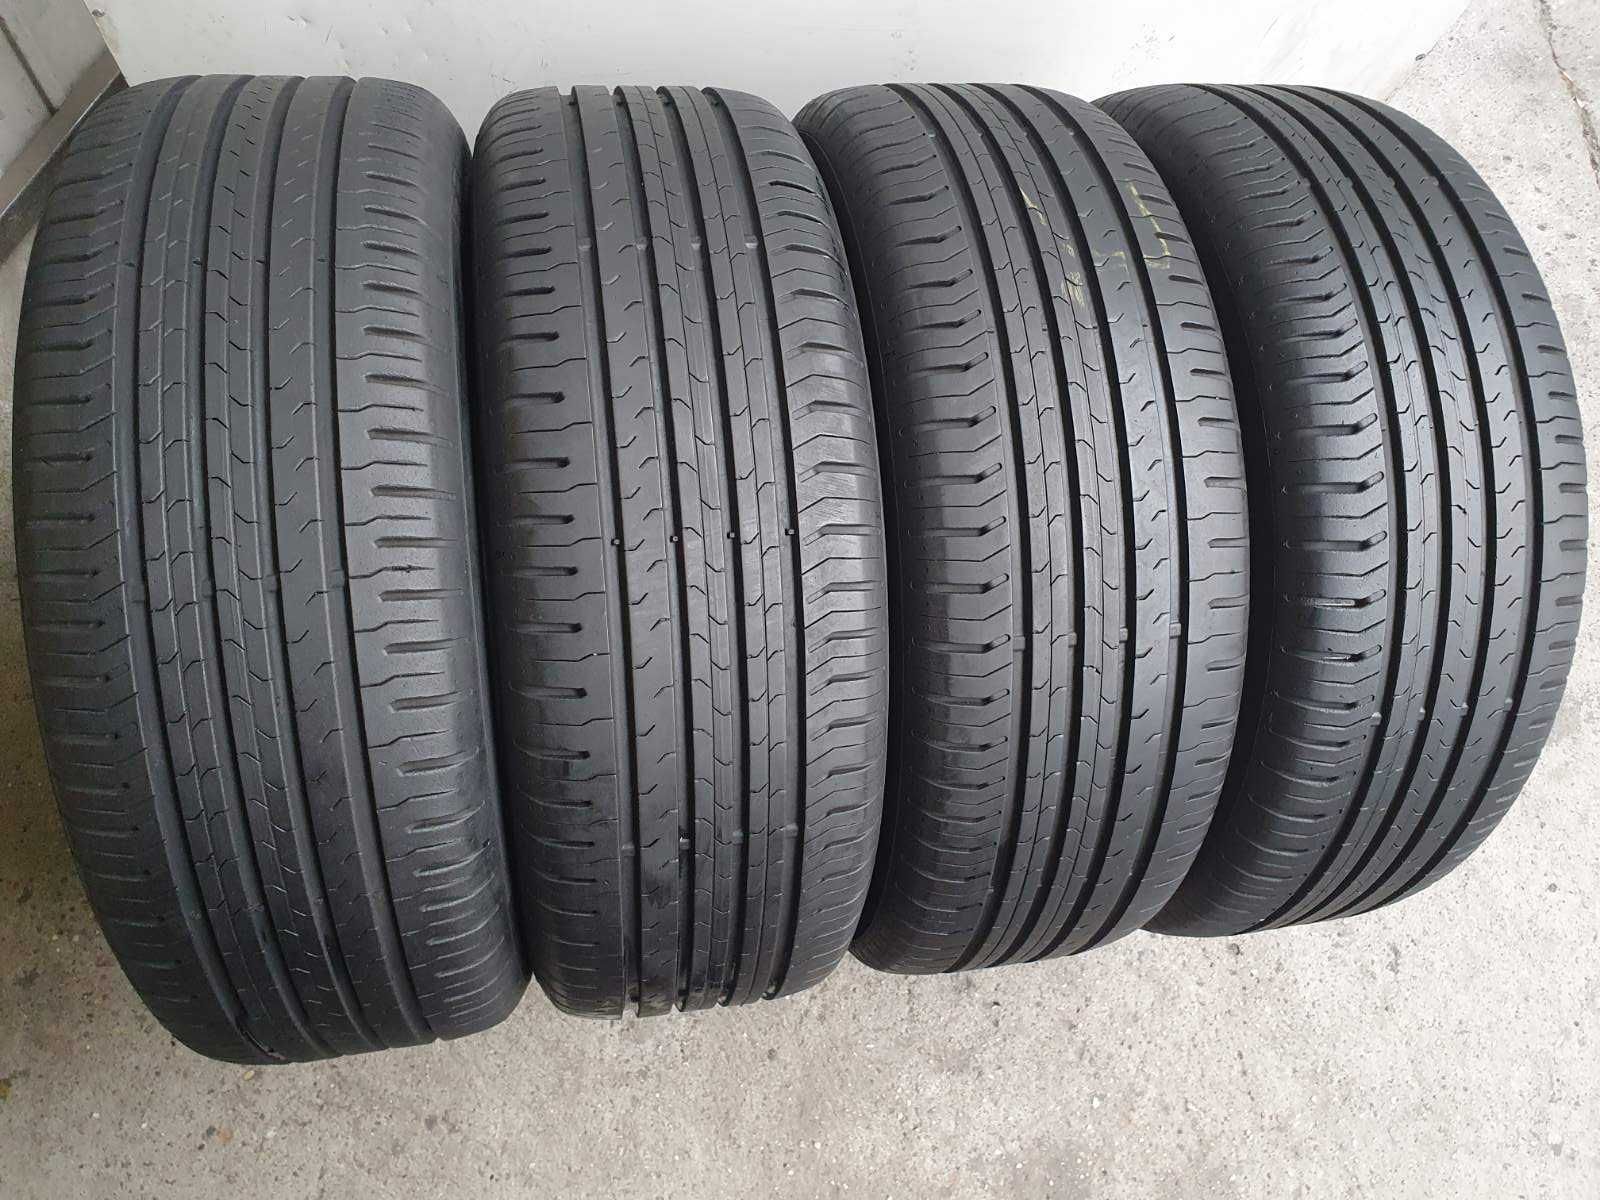 4x Continental Conti EcoContact 5 235/60R18  7mm